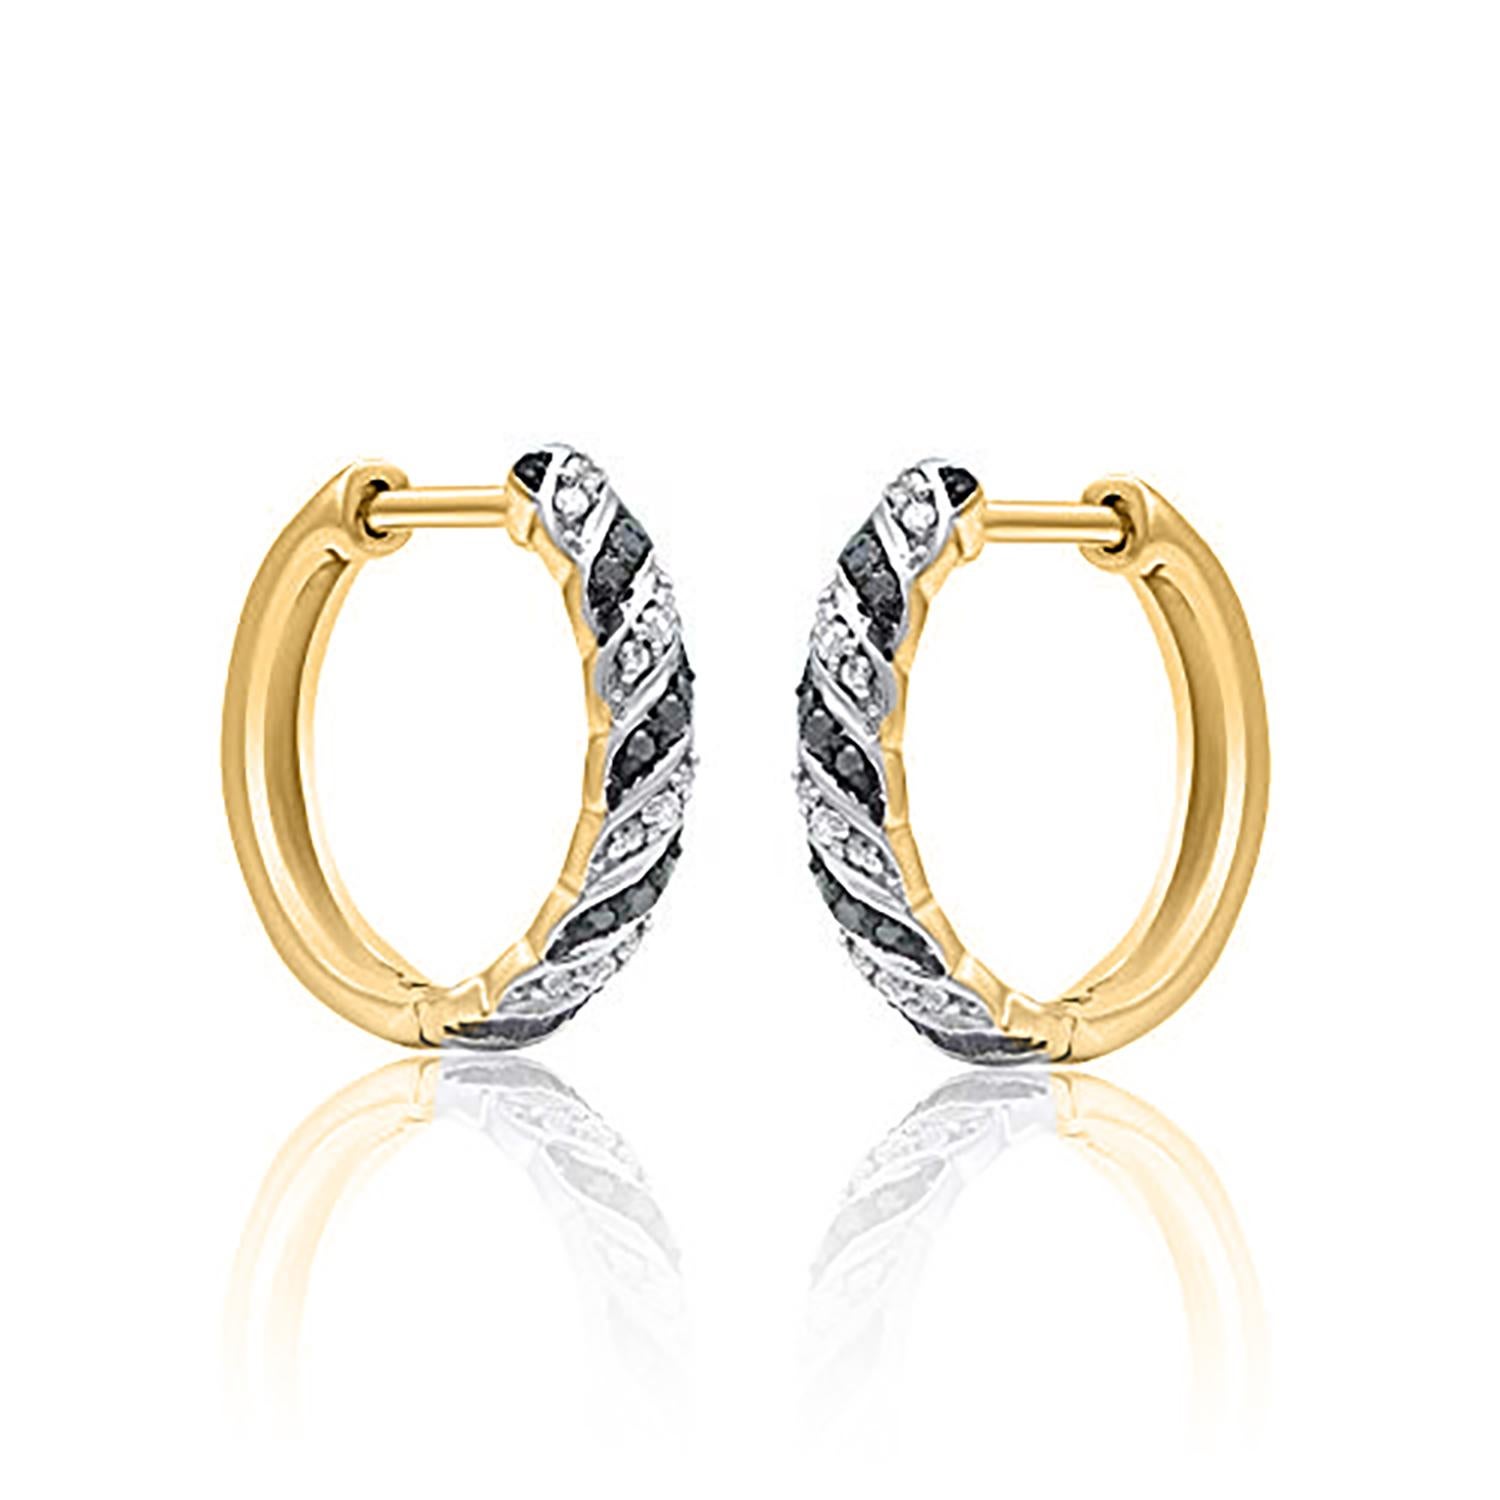 Classic and stylish diamond studded hoop earrings! perfect for daily wear. Crafted in 14 Karat yellow gold with 40 single cut diamond and black treated diamond in pave setting. These earring secure with hinged backs. The white diamonds are graded as